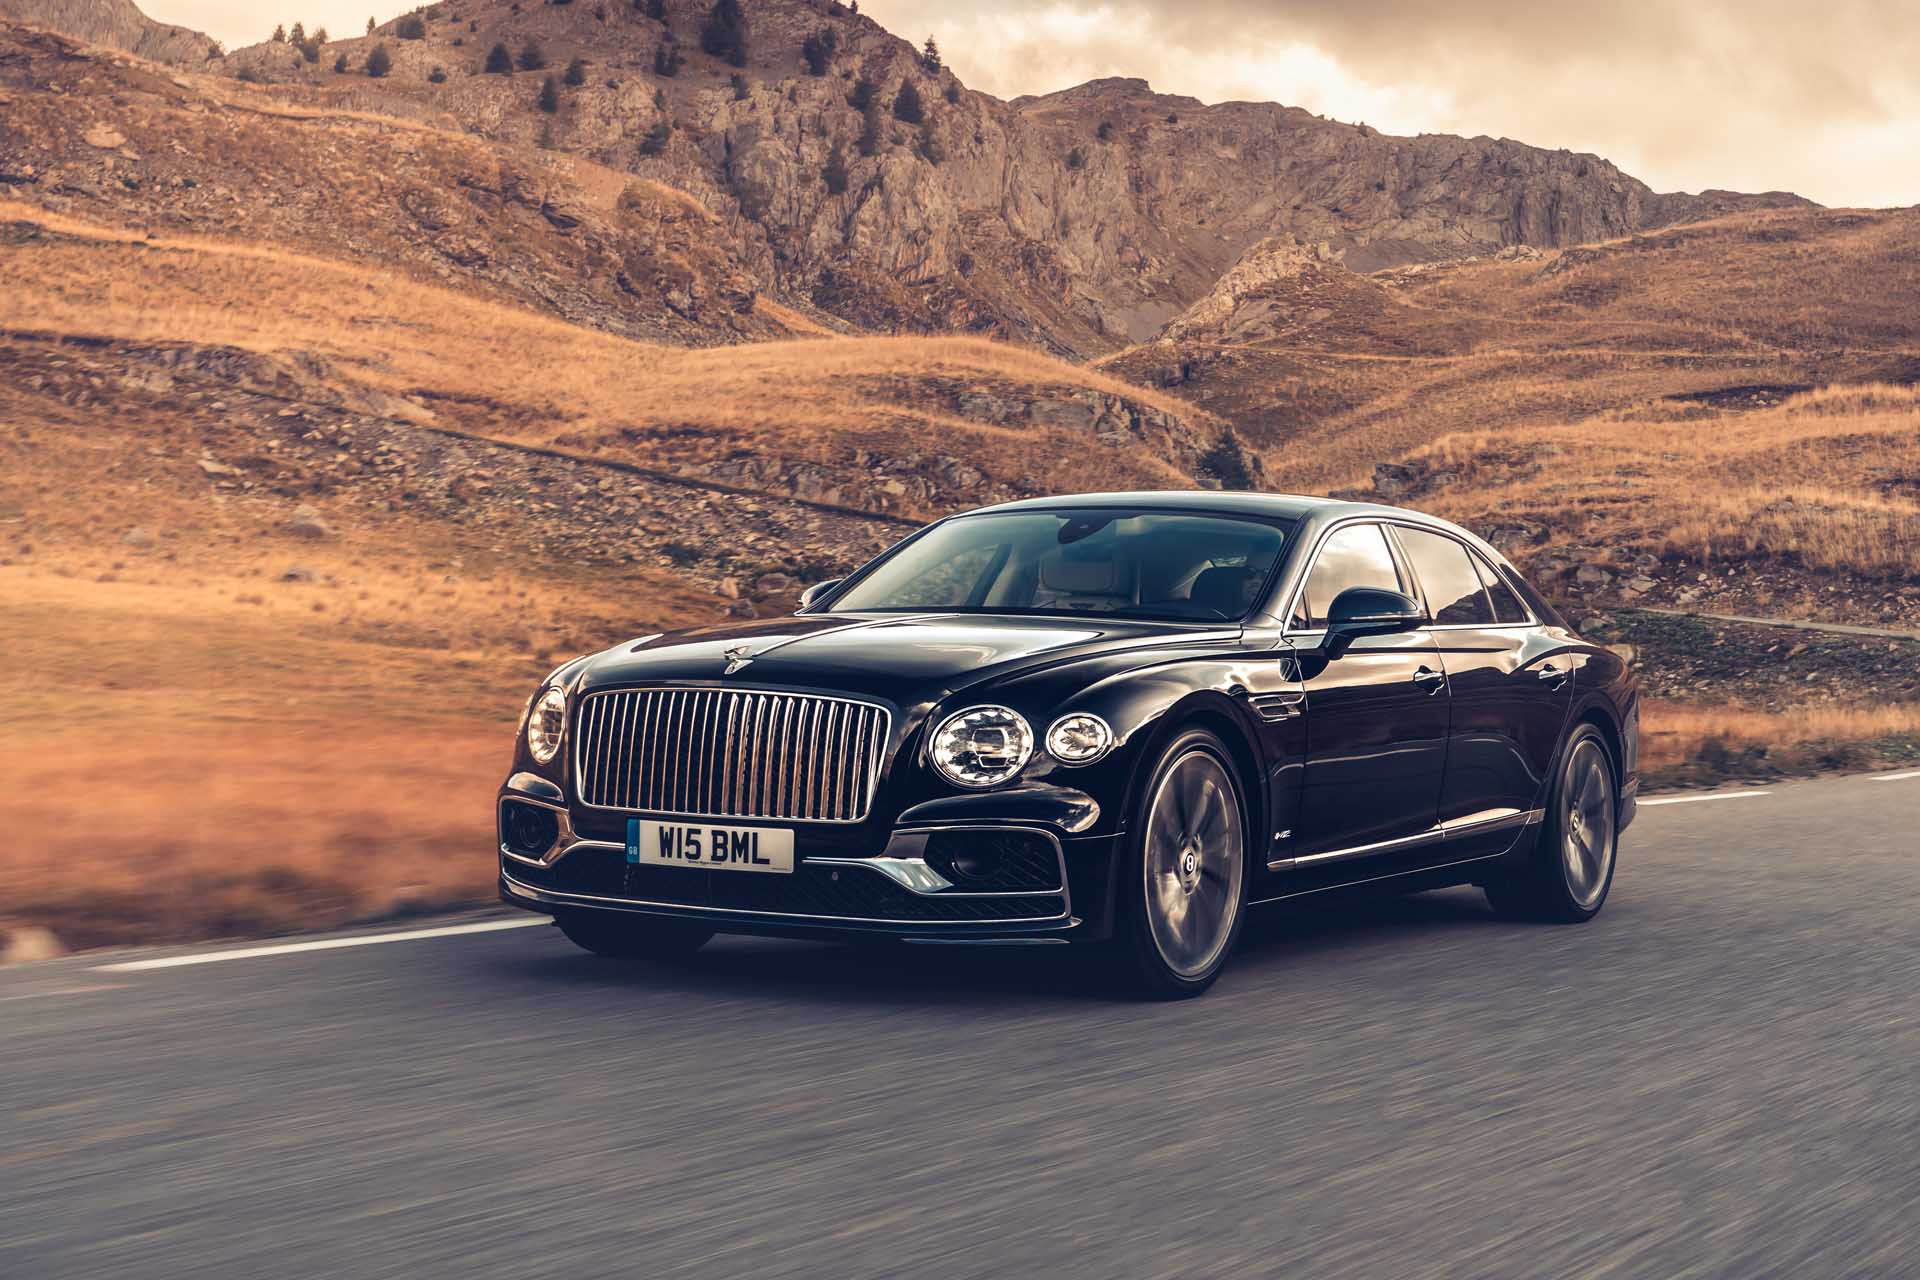 First drive review: Speed never felt so good in the 2020 Bentley